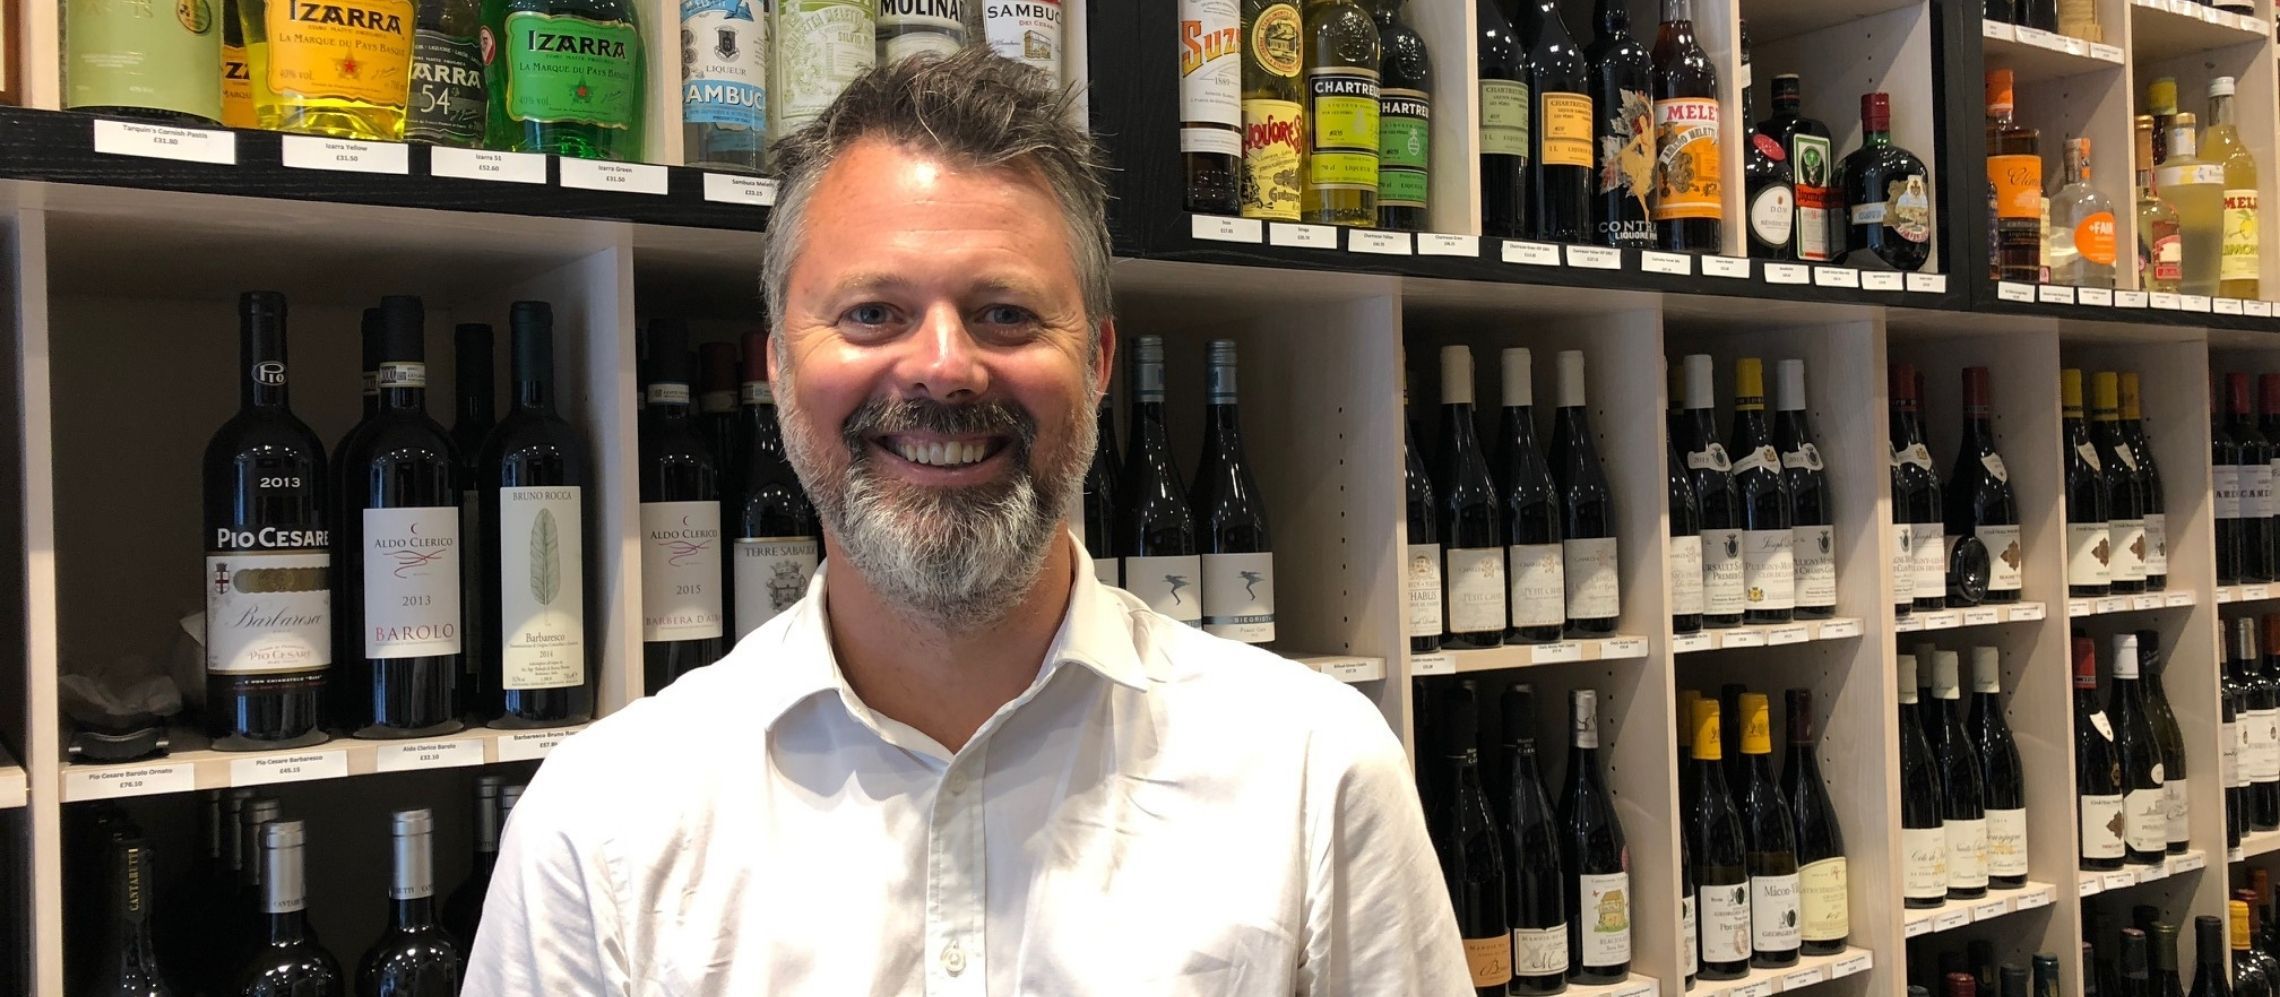 Photo for: Amathus’ Jeremy Lithgow MW on what wine buyers looking for most in a new wine